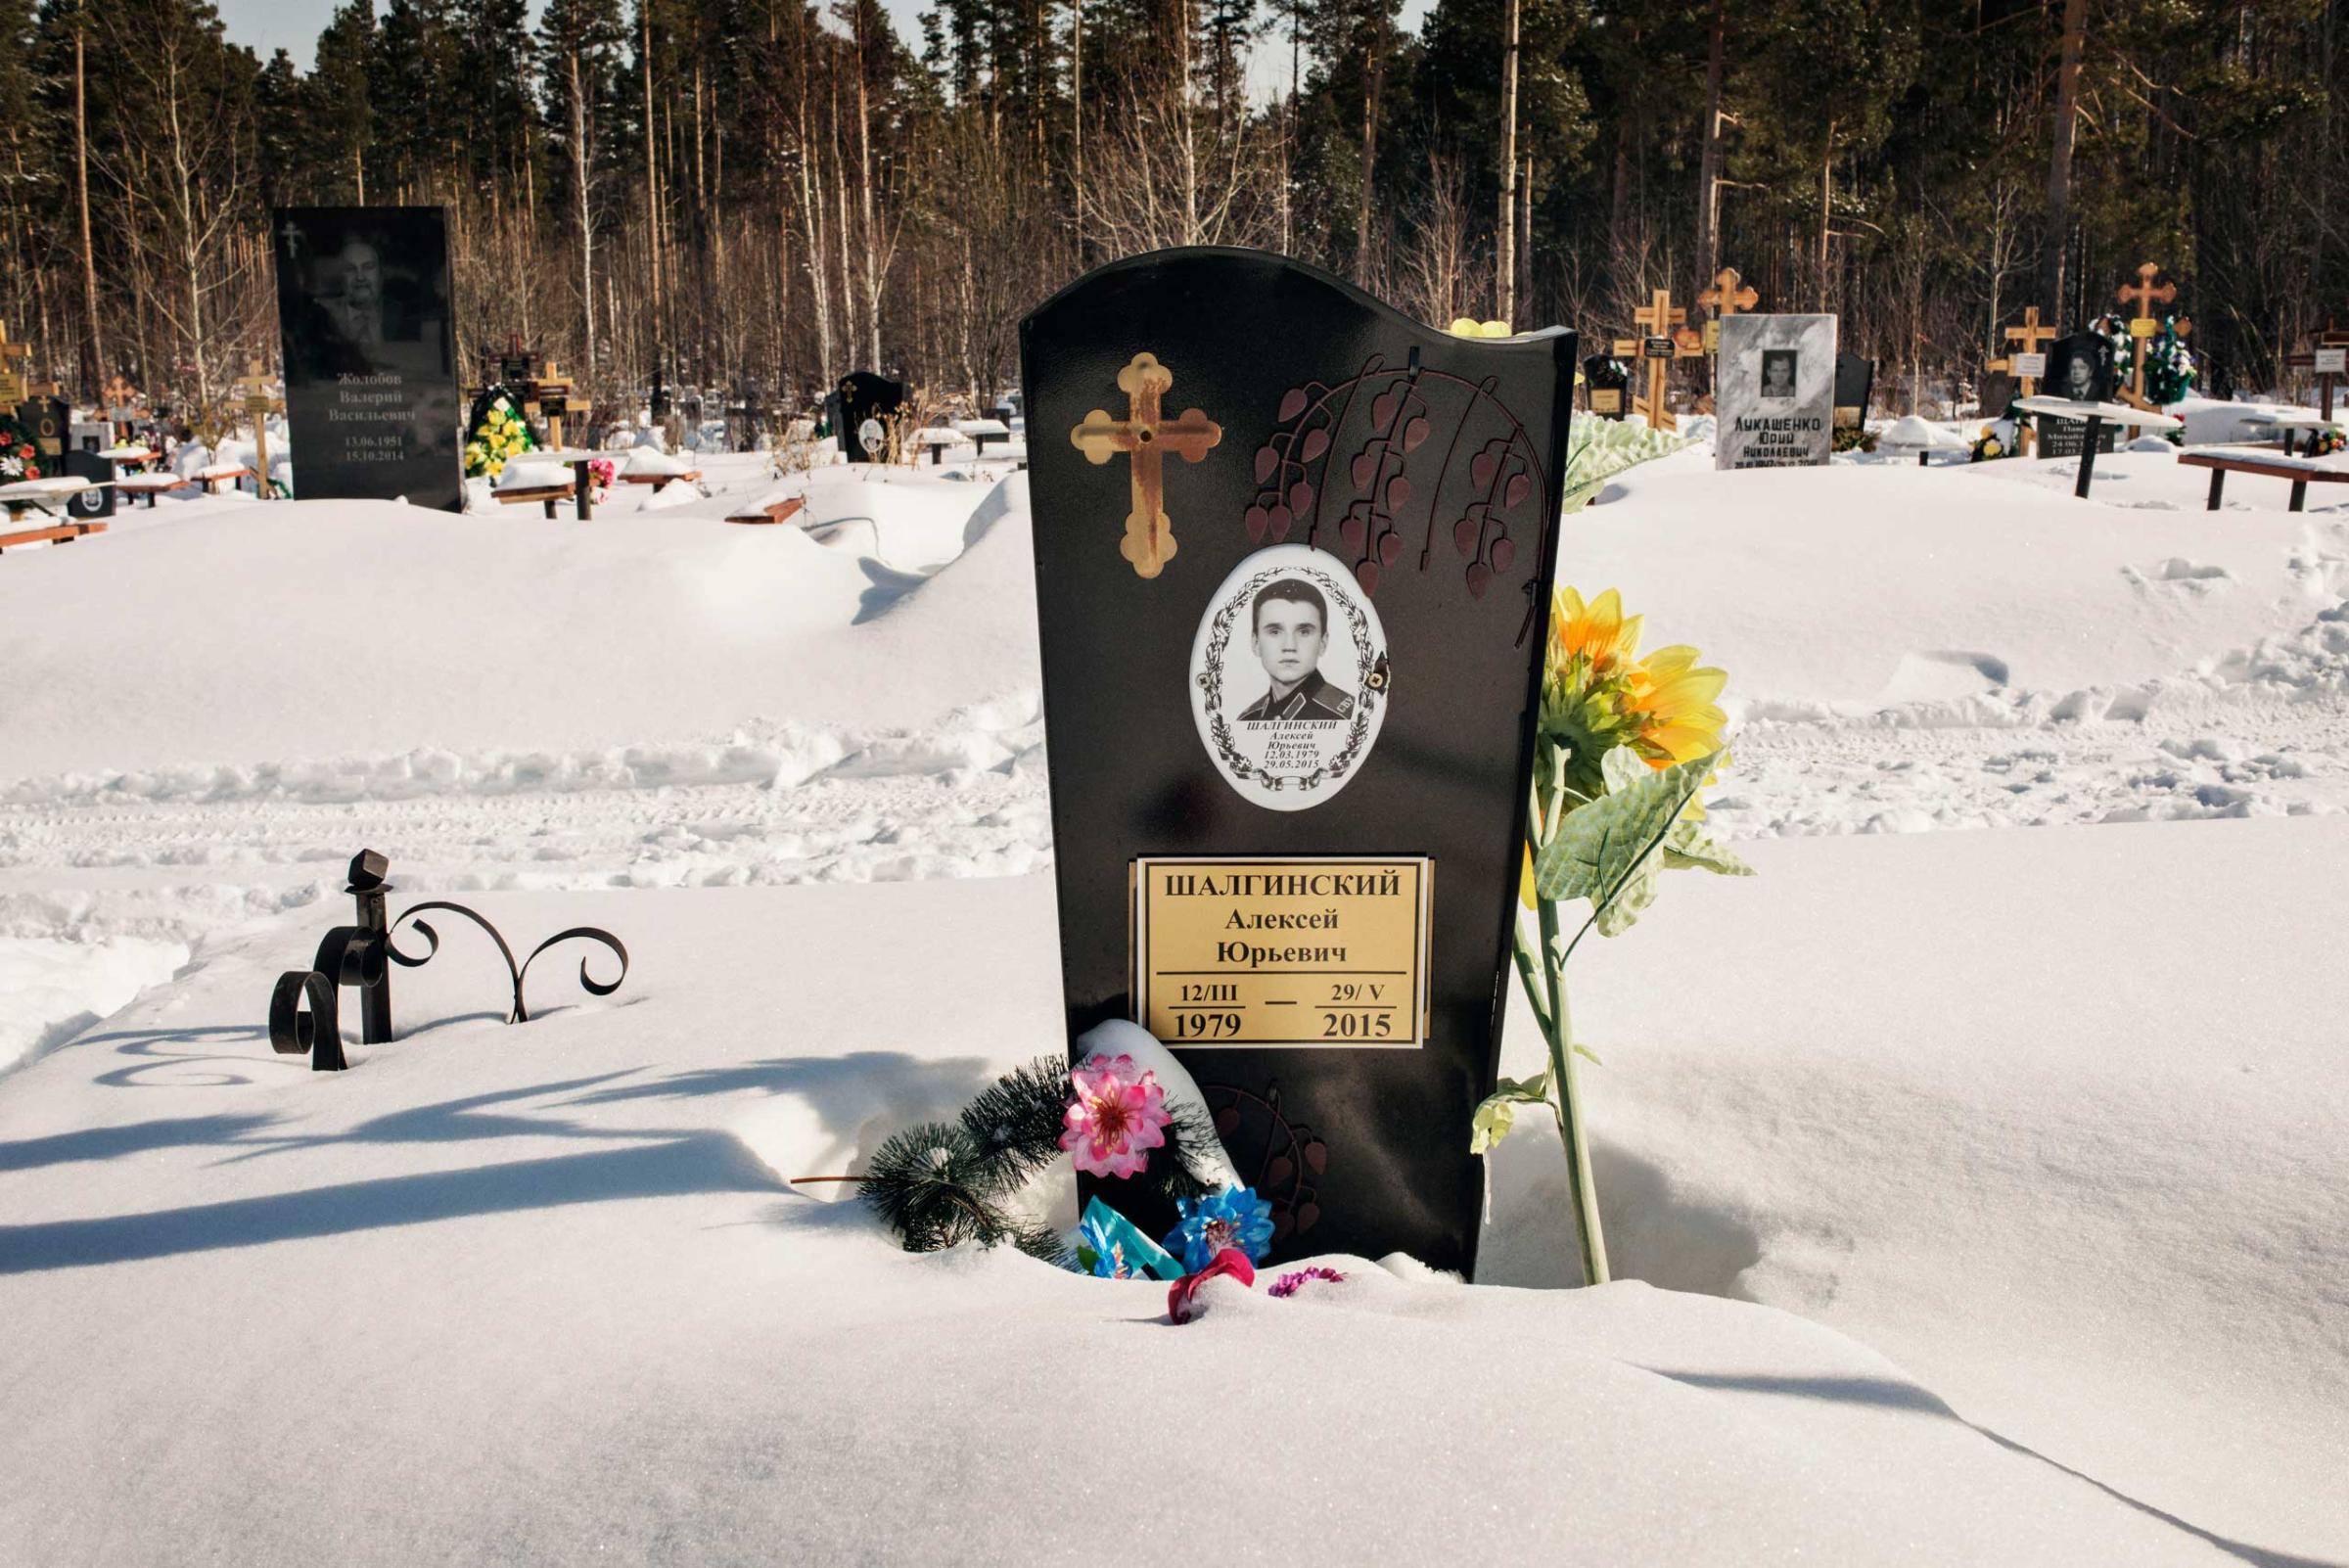 Alexei is buried in a cemetery on the outskirt of Yekaterinburg. He died in 2015 because of the large use of Krokodil that reduced drastically his immune system.